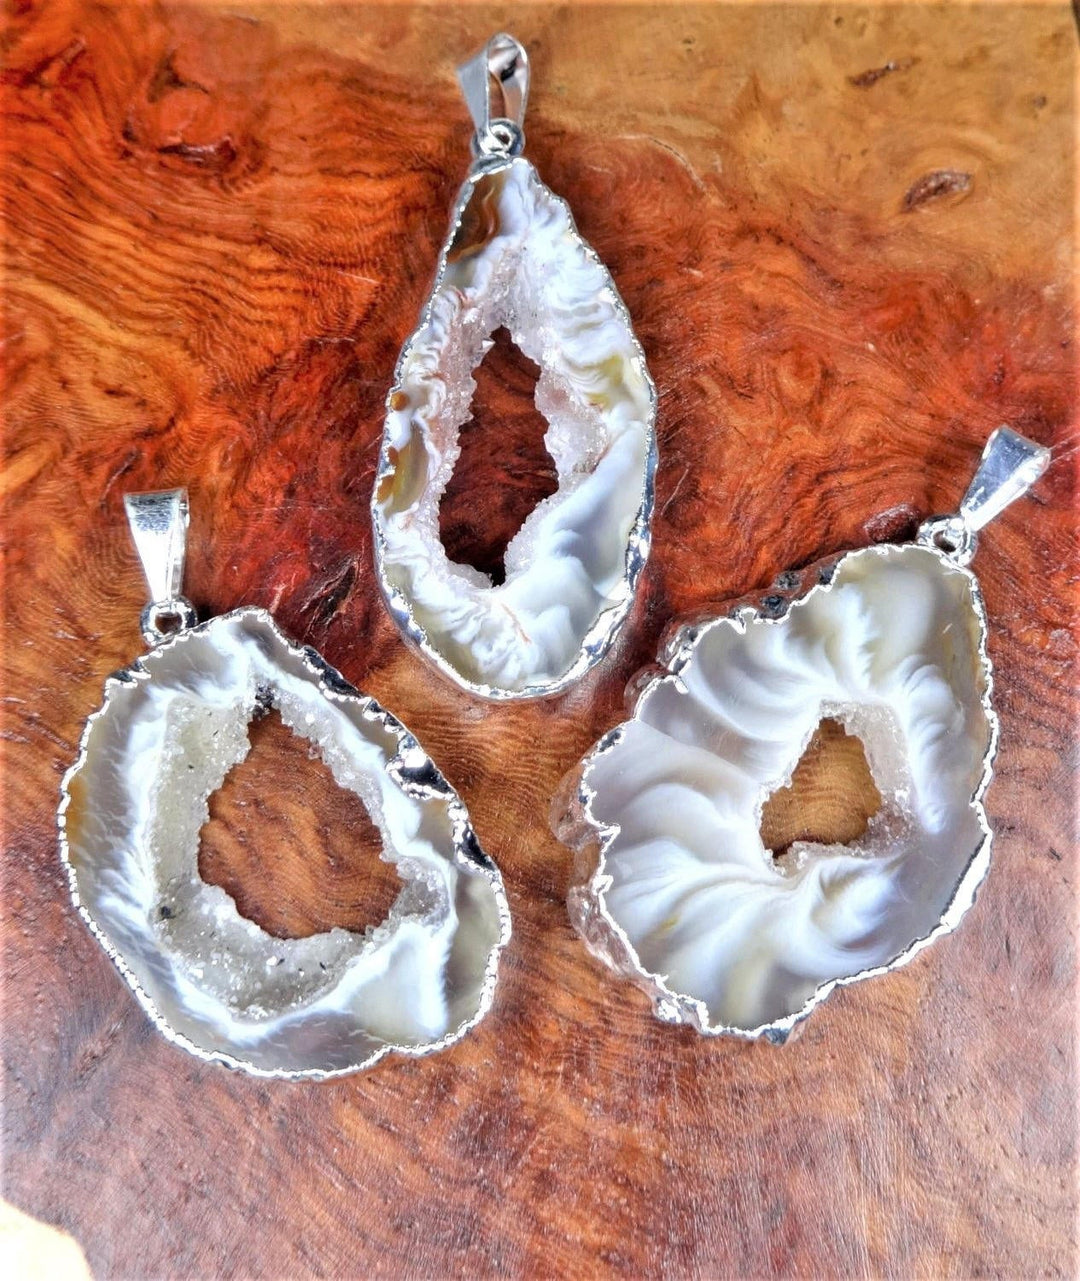 Bulk Wholesale Lot Of 5 Pieces Oco Geode Slice Pendant Silver Plated Crystal Slab Charm Bead Necklace Supply